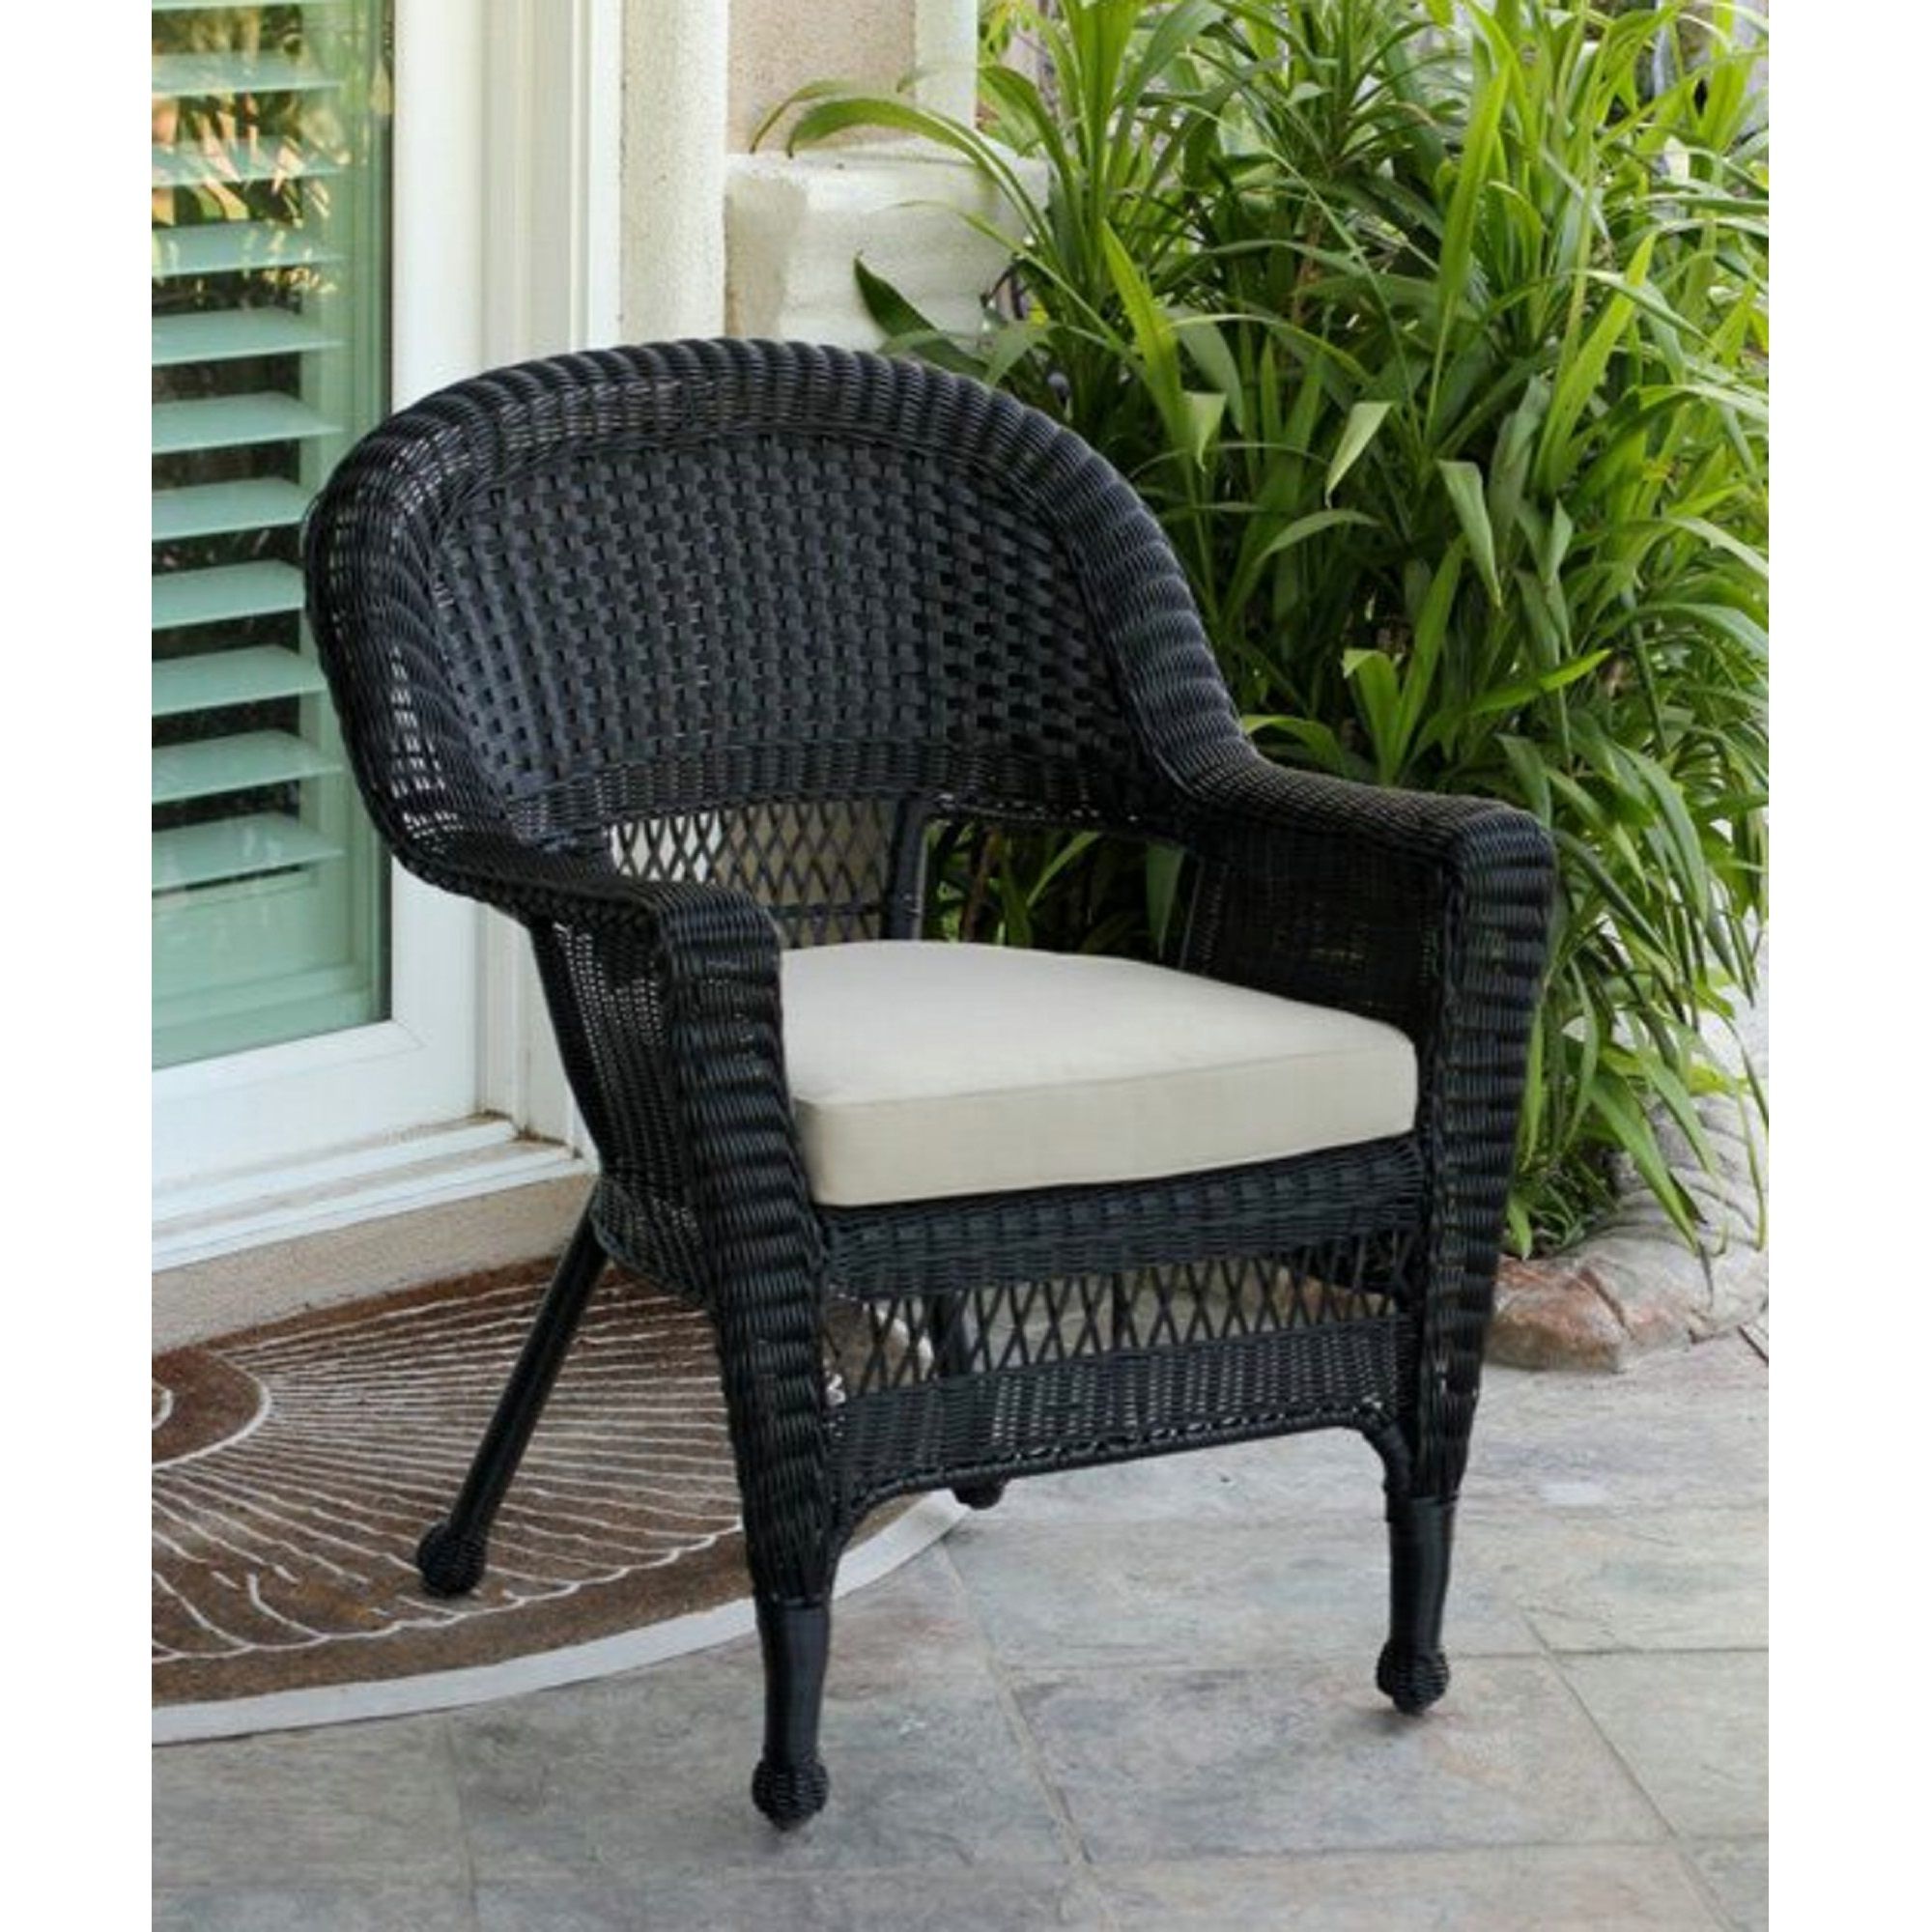 36" Black Resin Wicker Outdoor Patio Garden Chair With Tan Cushion Within Well Known Rattan Wicker Outdoor Seating Sets (View 15 of 15)